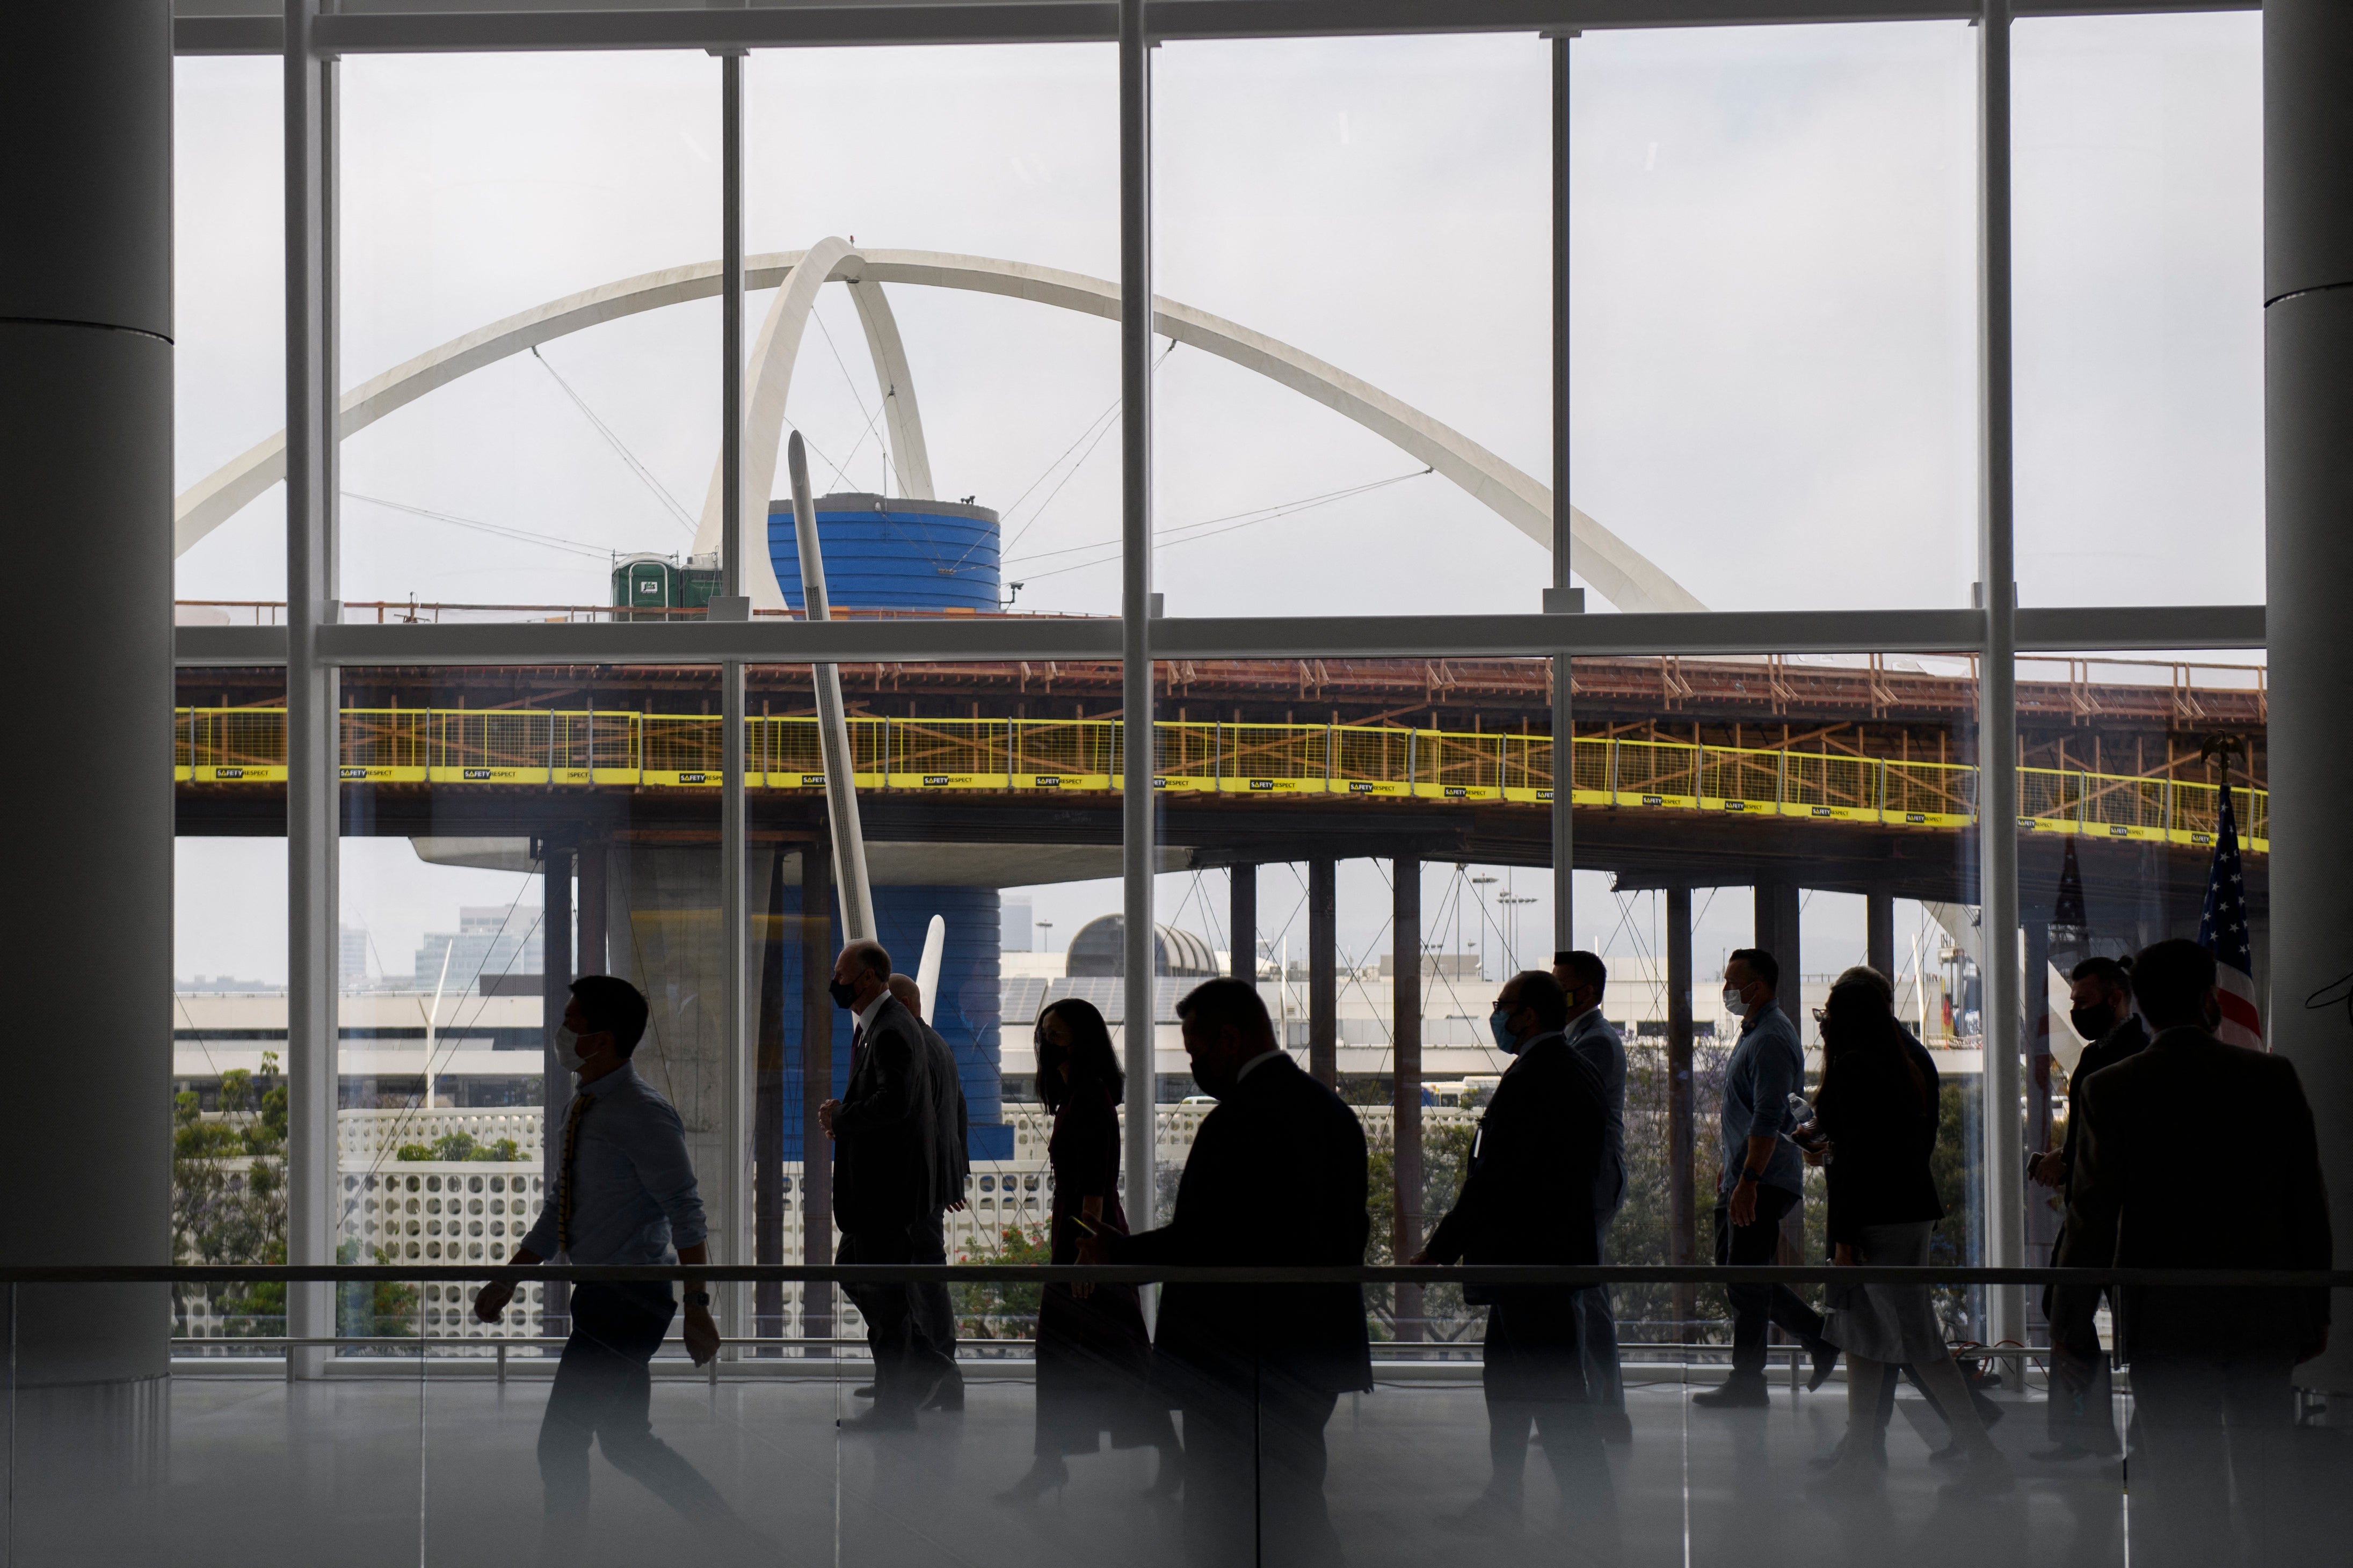 Two incidents took place at LAX within two days of each other